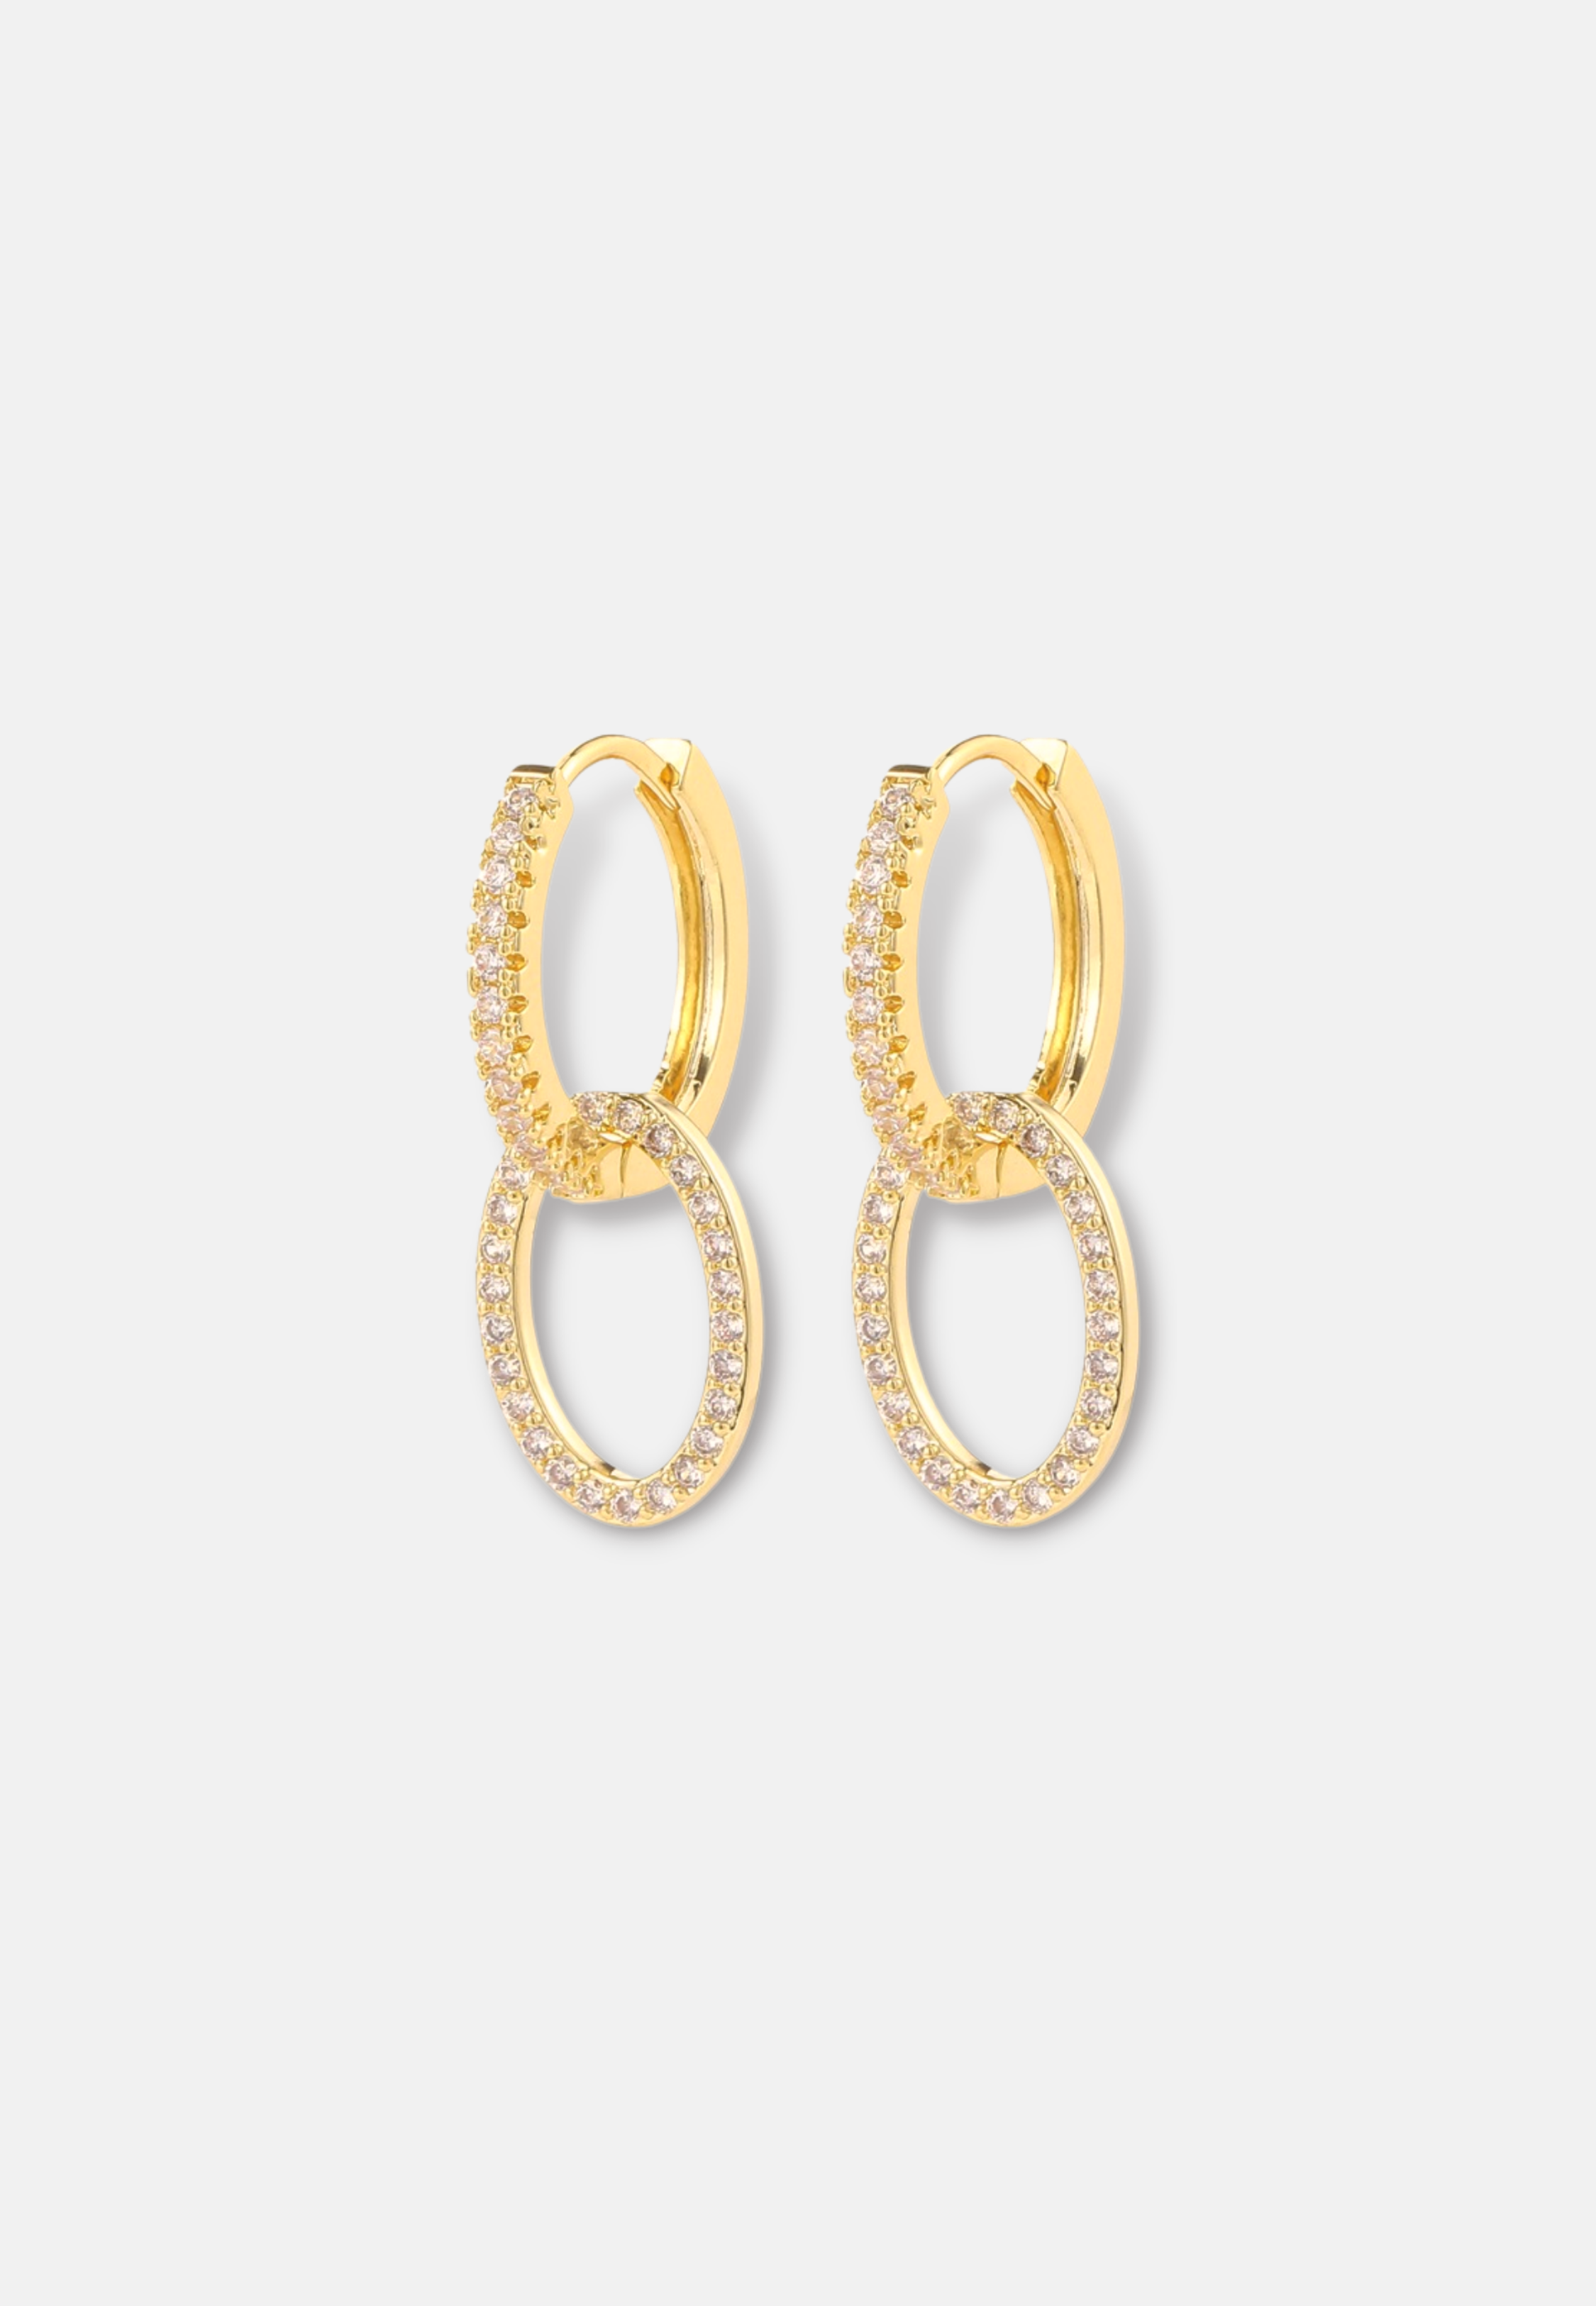 Hillenic Gold 10mm Iced Circle Earrings